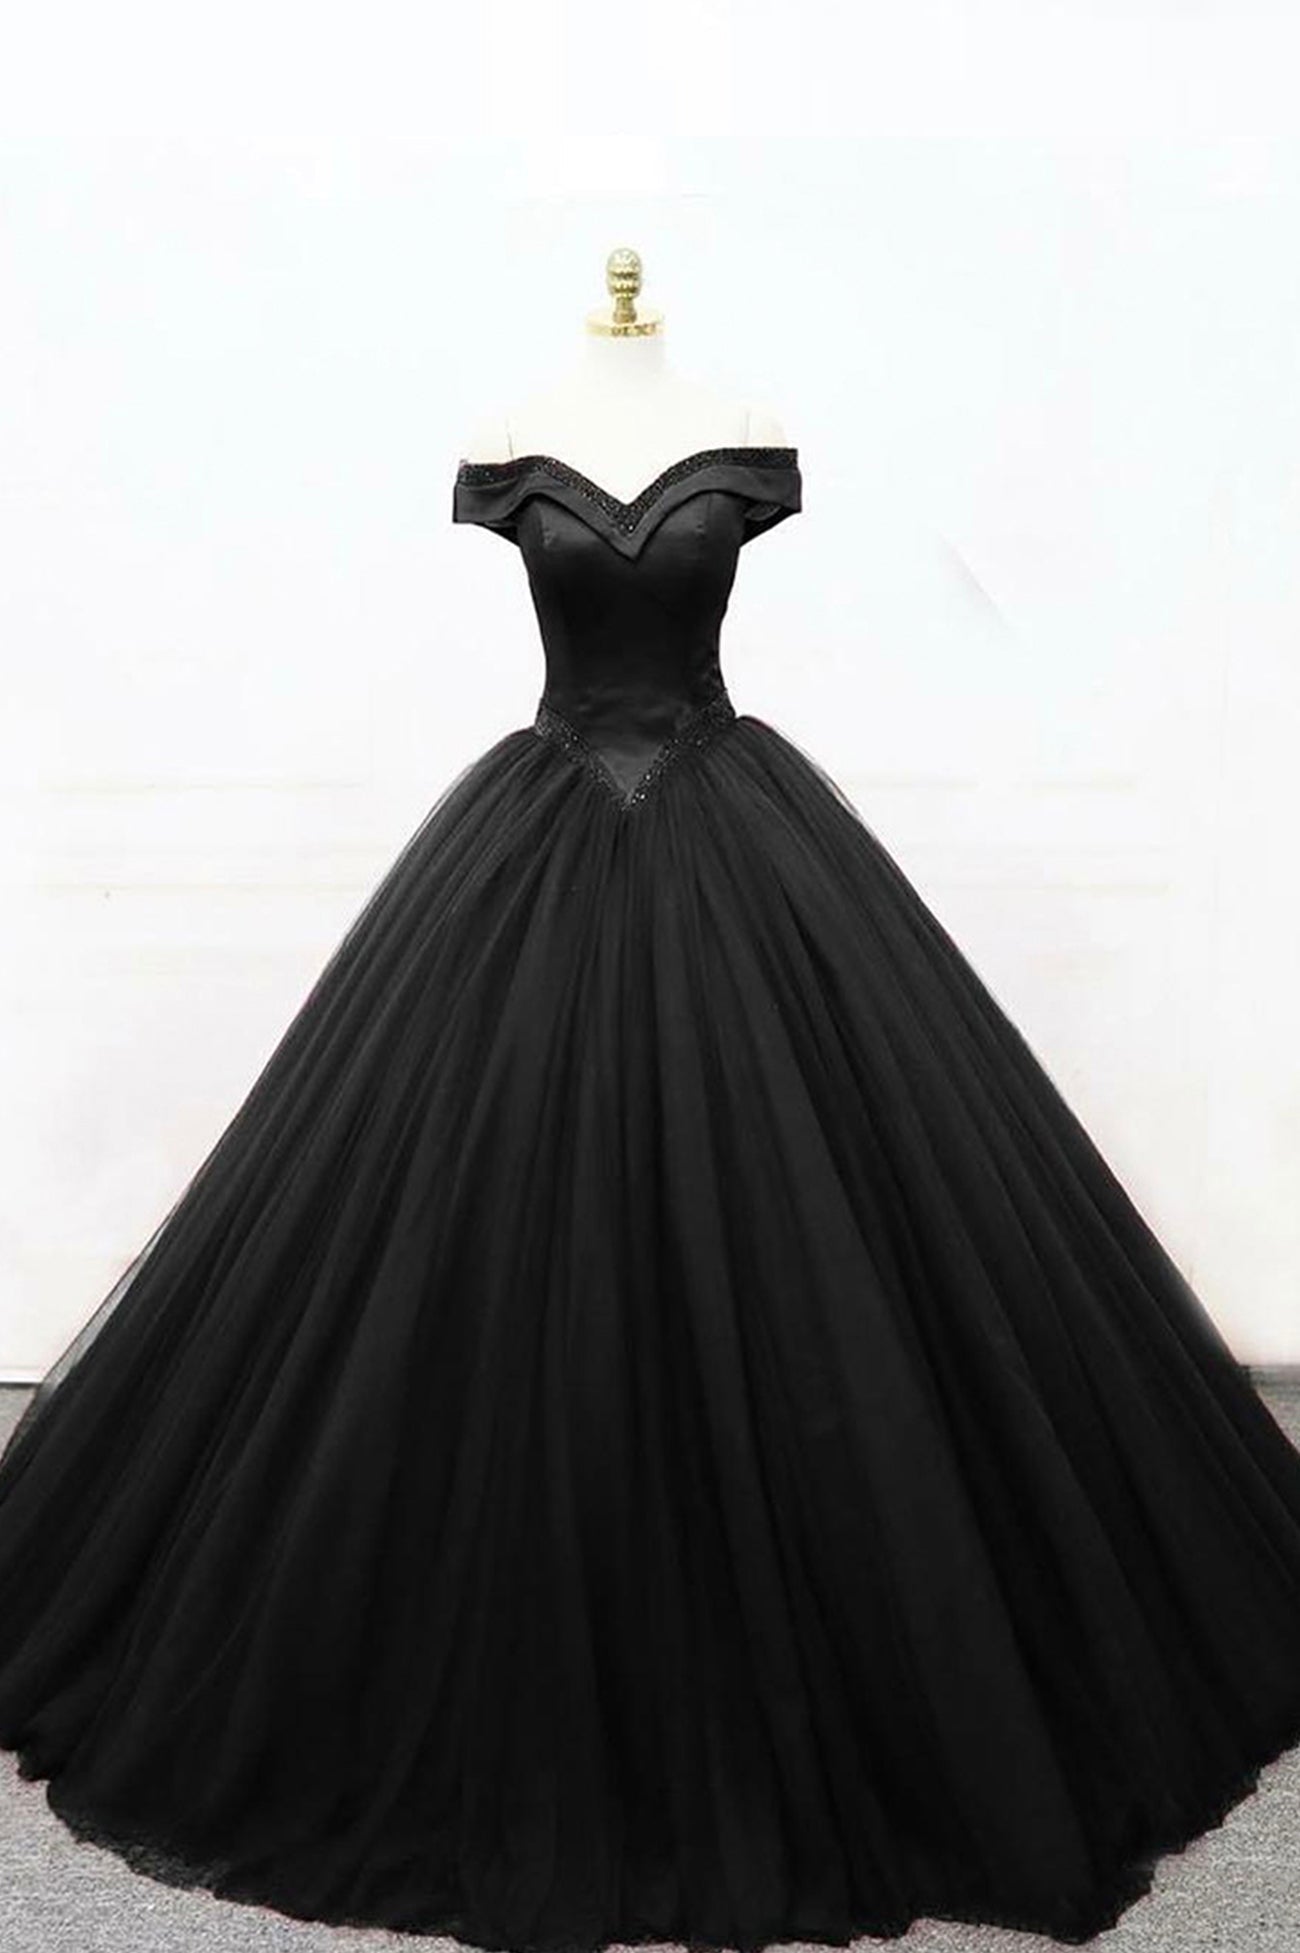 Party Dress Night, Black Tulle Beaded Long Ball Gown, A-Line Off the Shoulder Evening Formal Gown